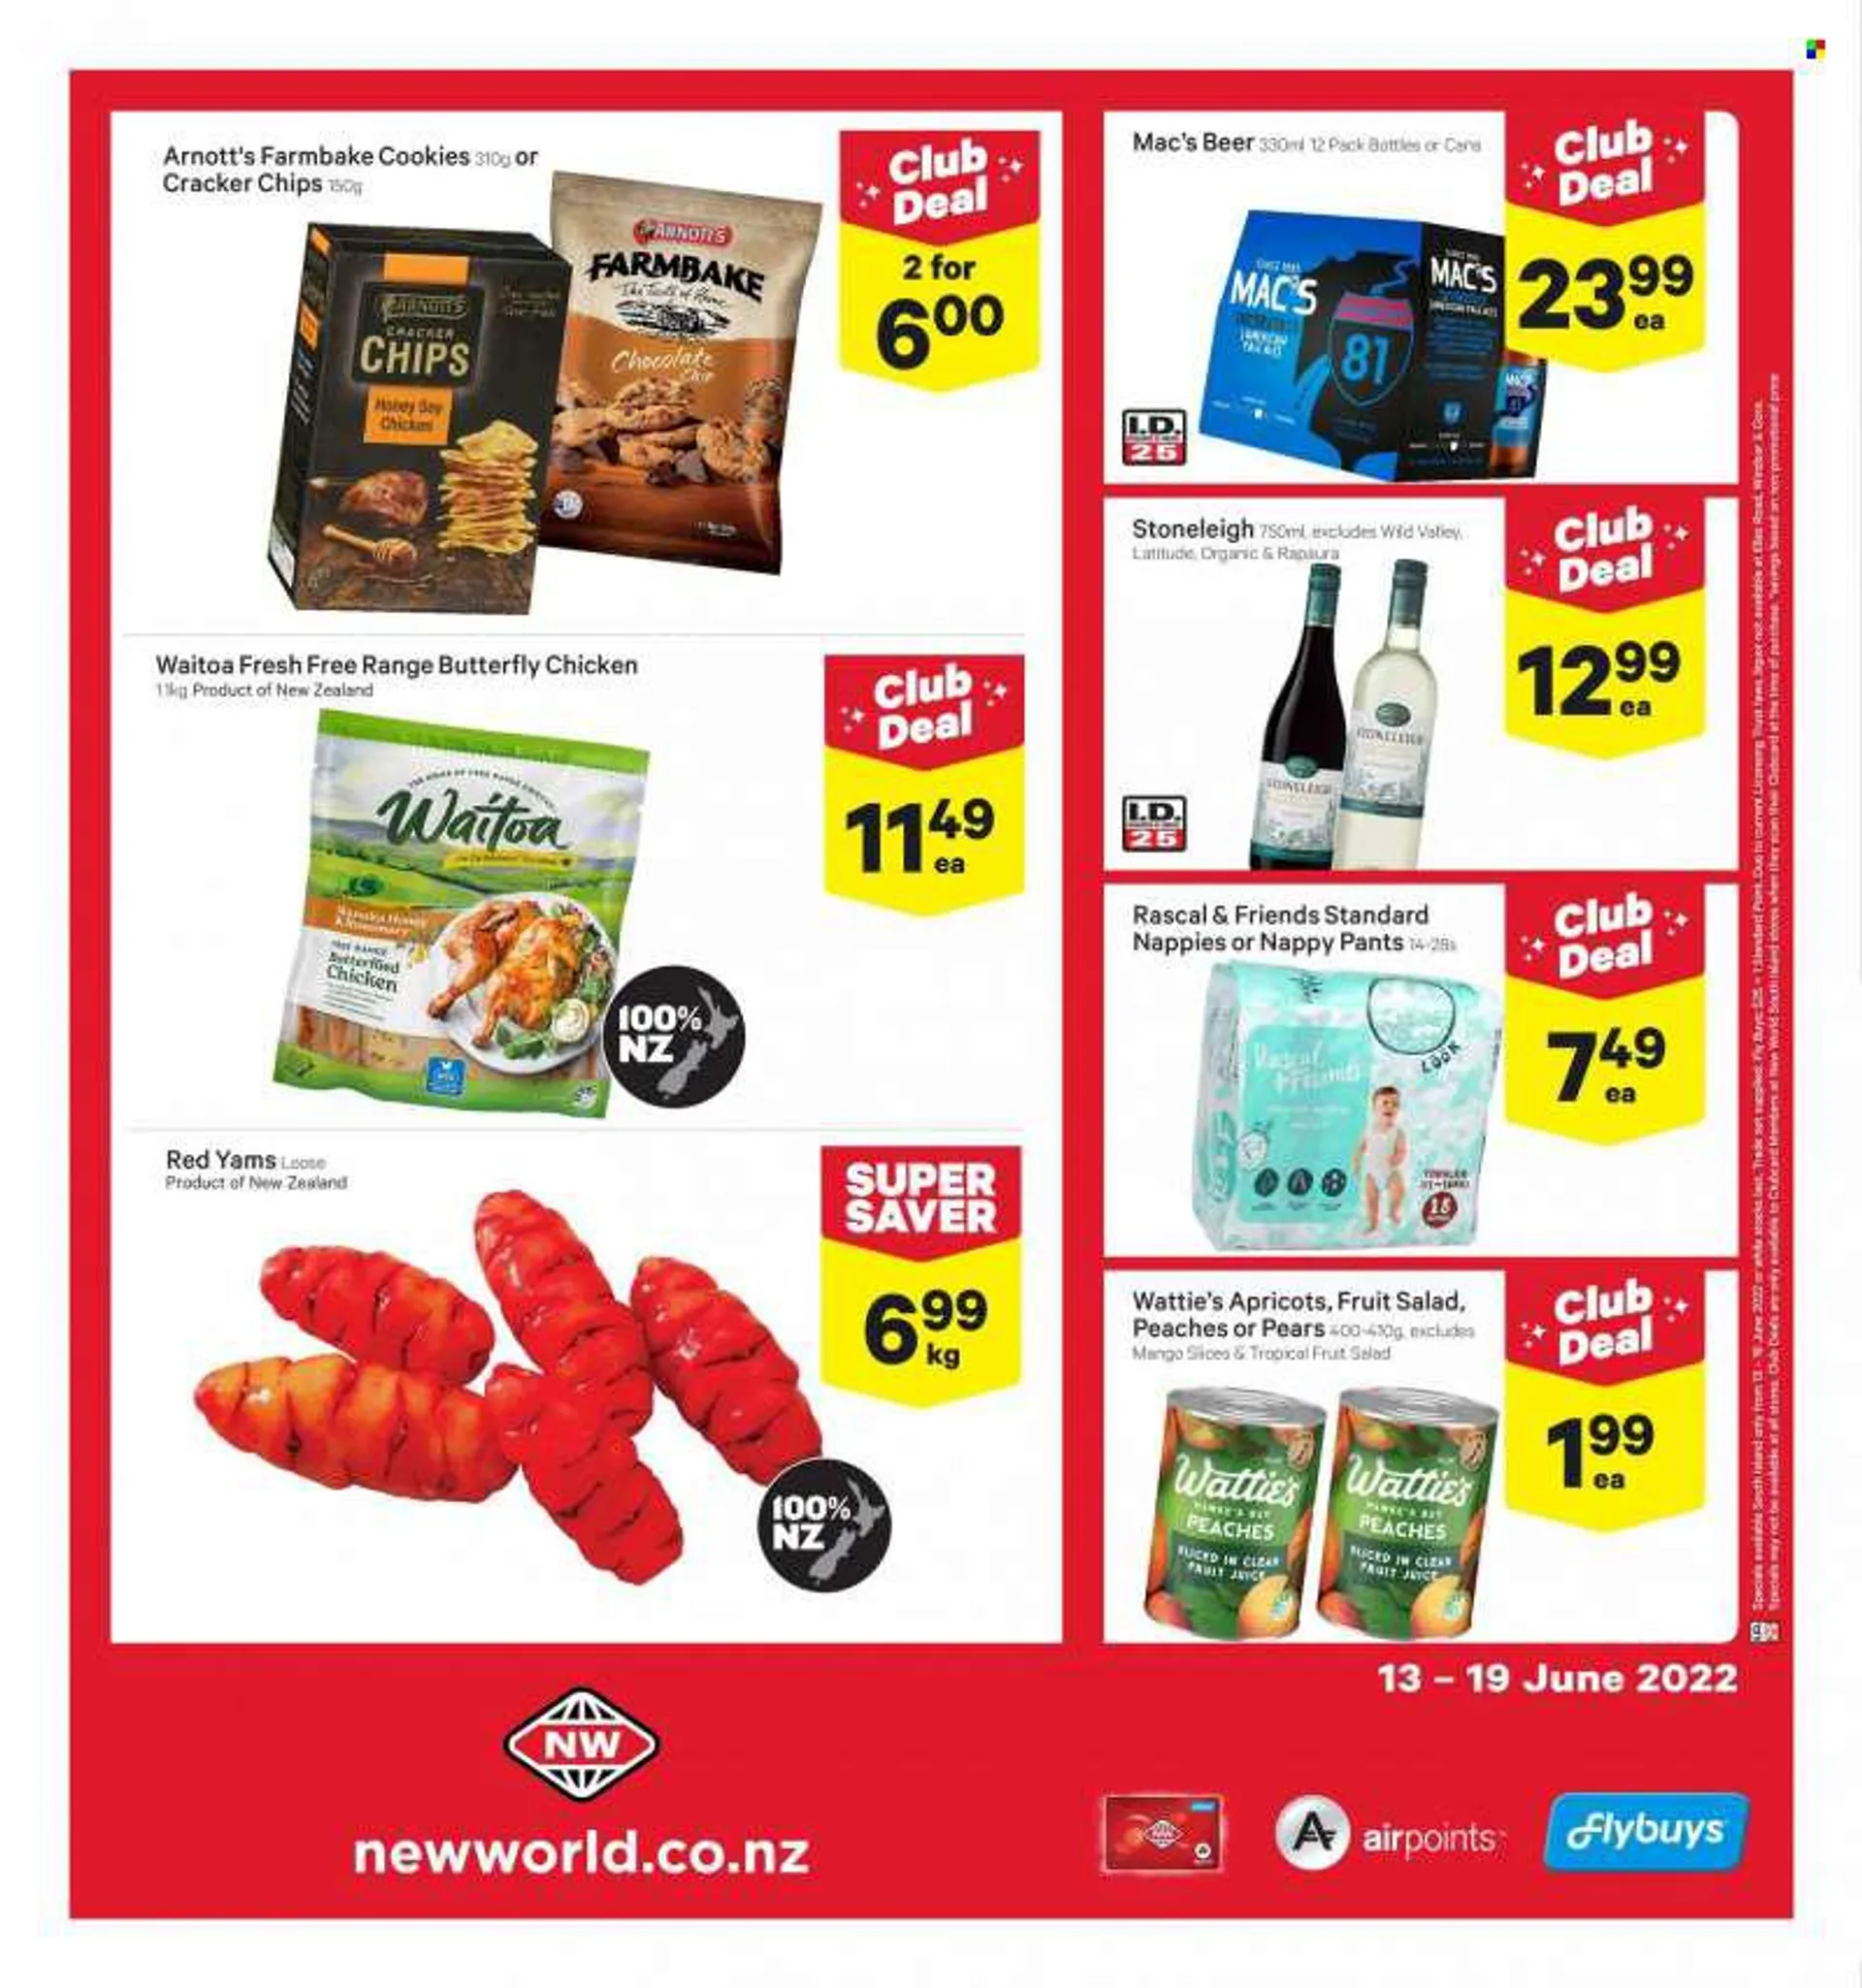 New World mailer - 13.06.2022 - 19.06.2022 - Sales products - pears, apricots, peaches, Watties, cookies, crackers, chips, fruit salad, beer, Mac’s, pants, nappies. Page 2.